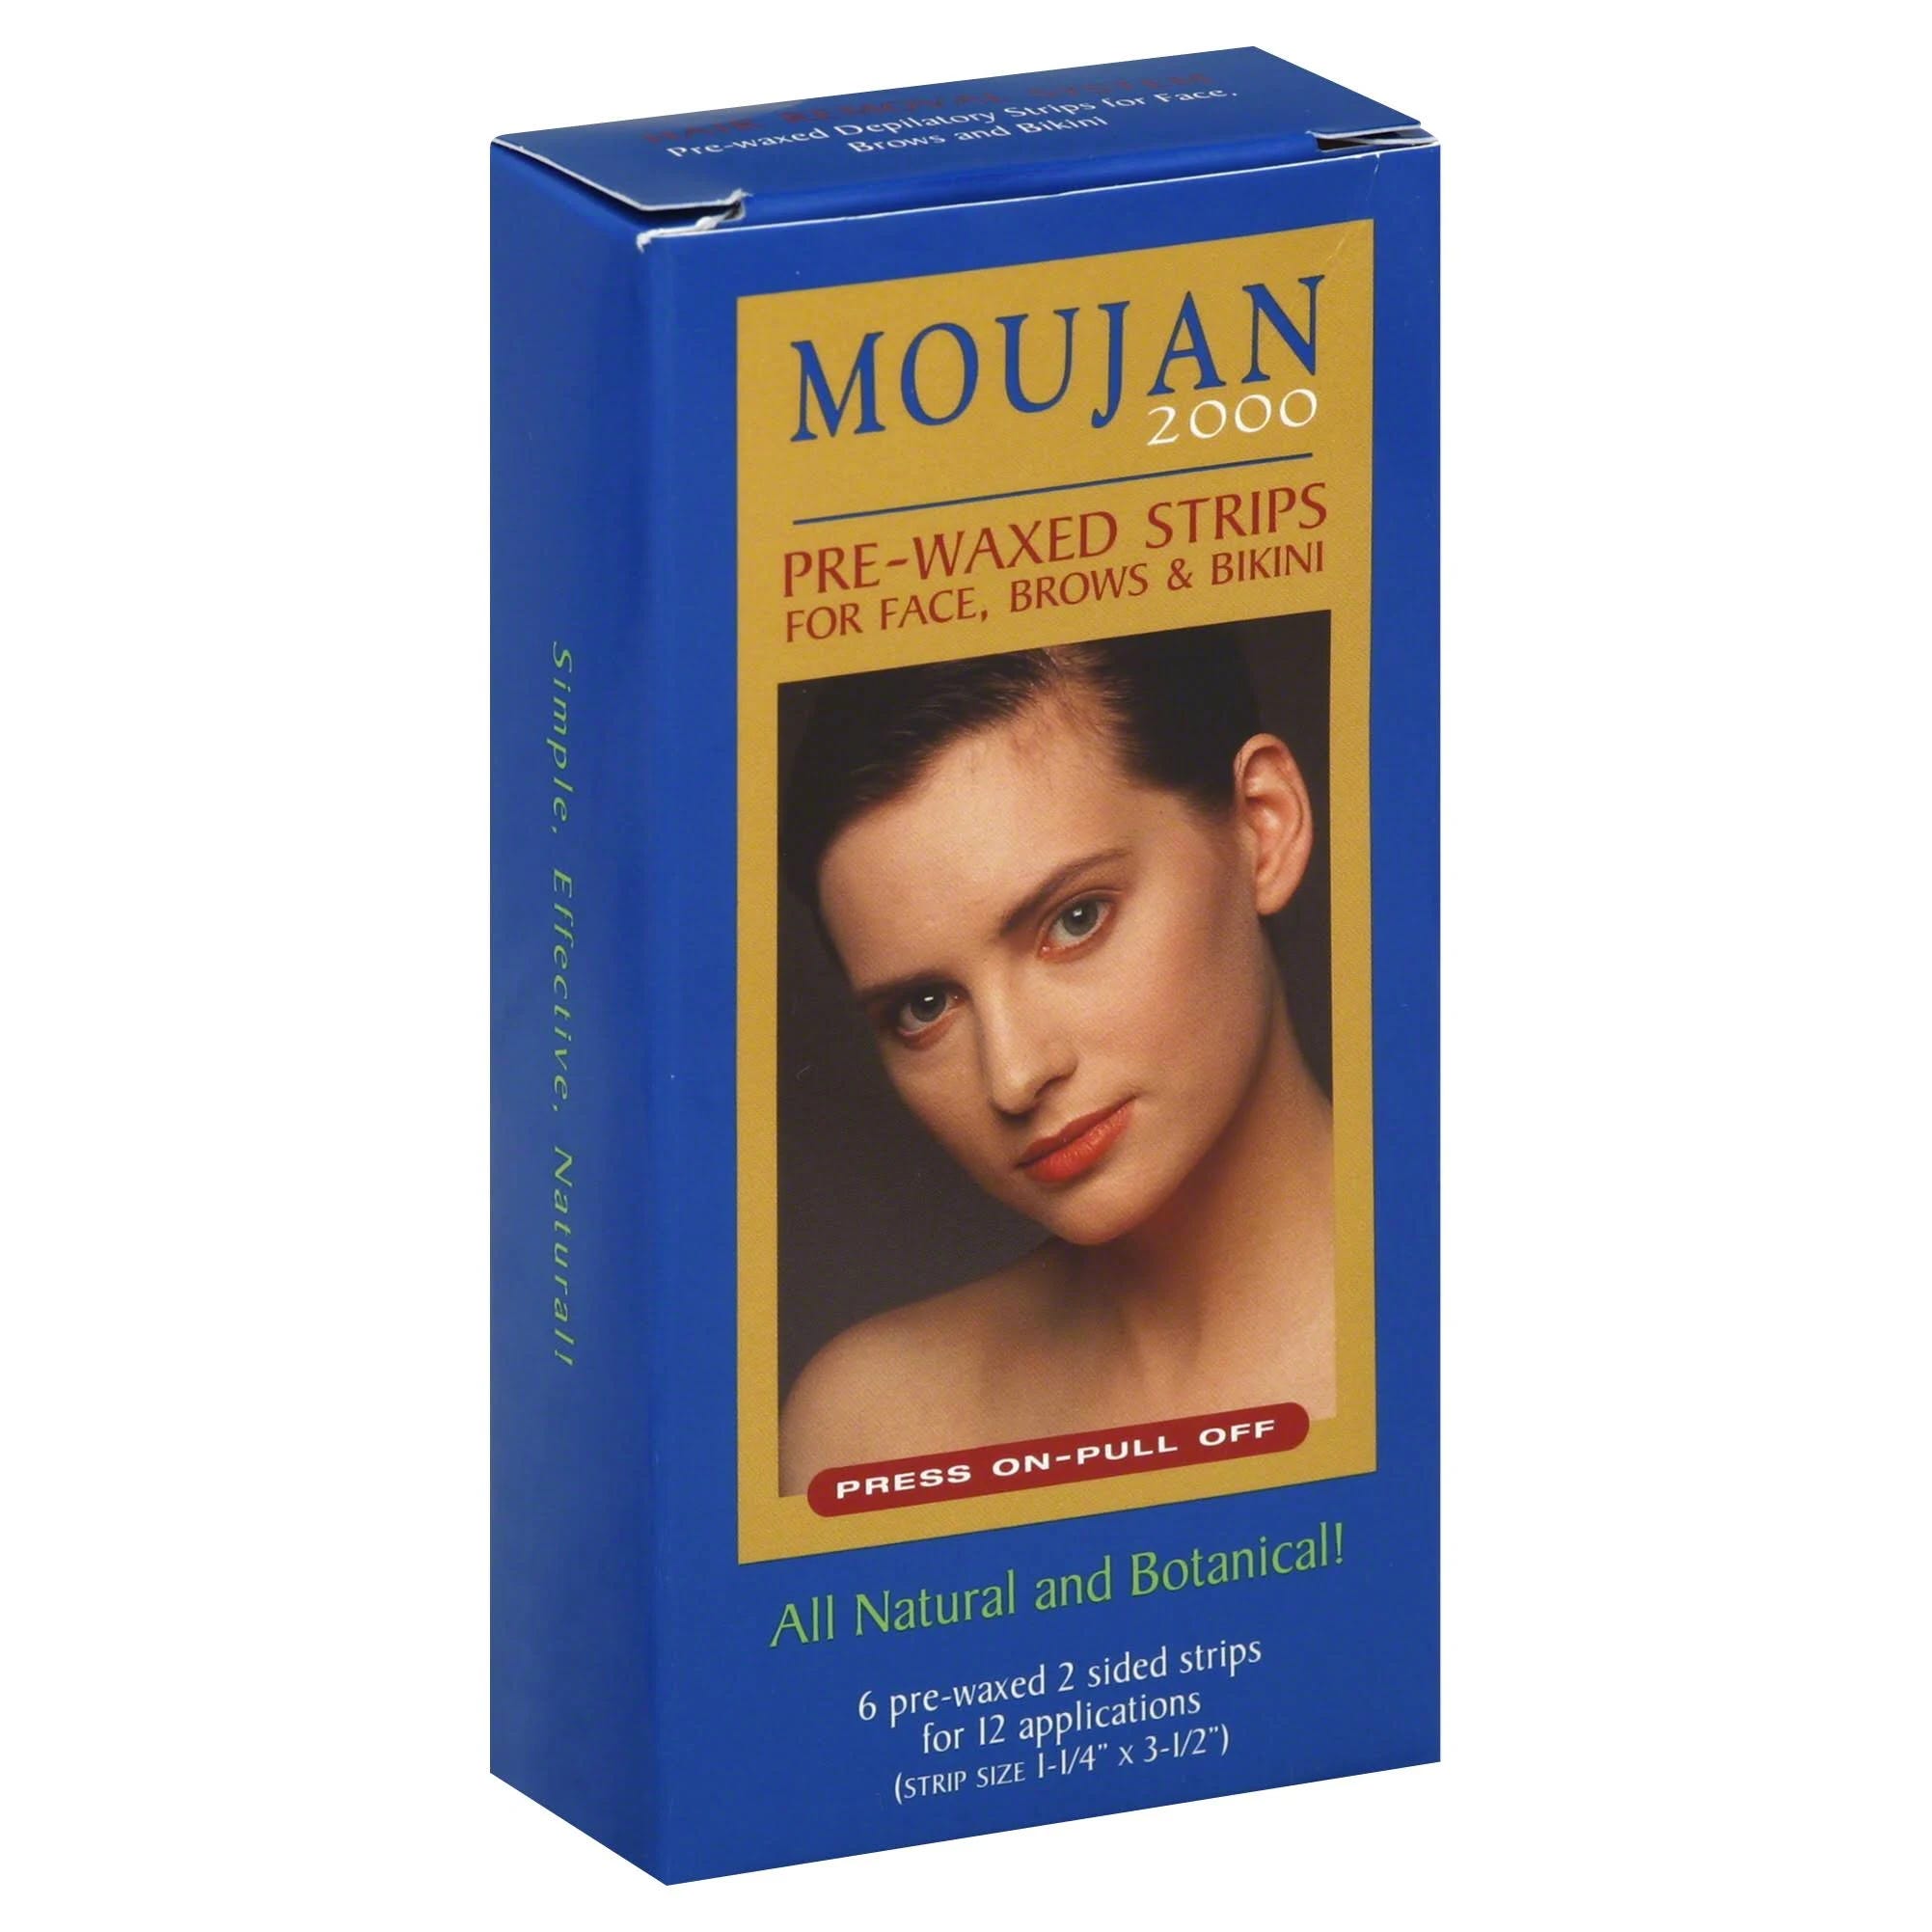 Moujan Easy Pre-Waxed Hair Removal Strips for Face, Brows & Bikini | Image